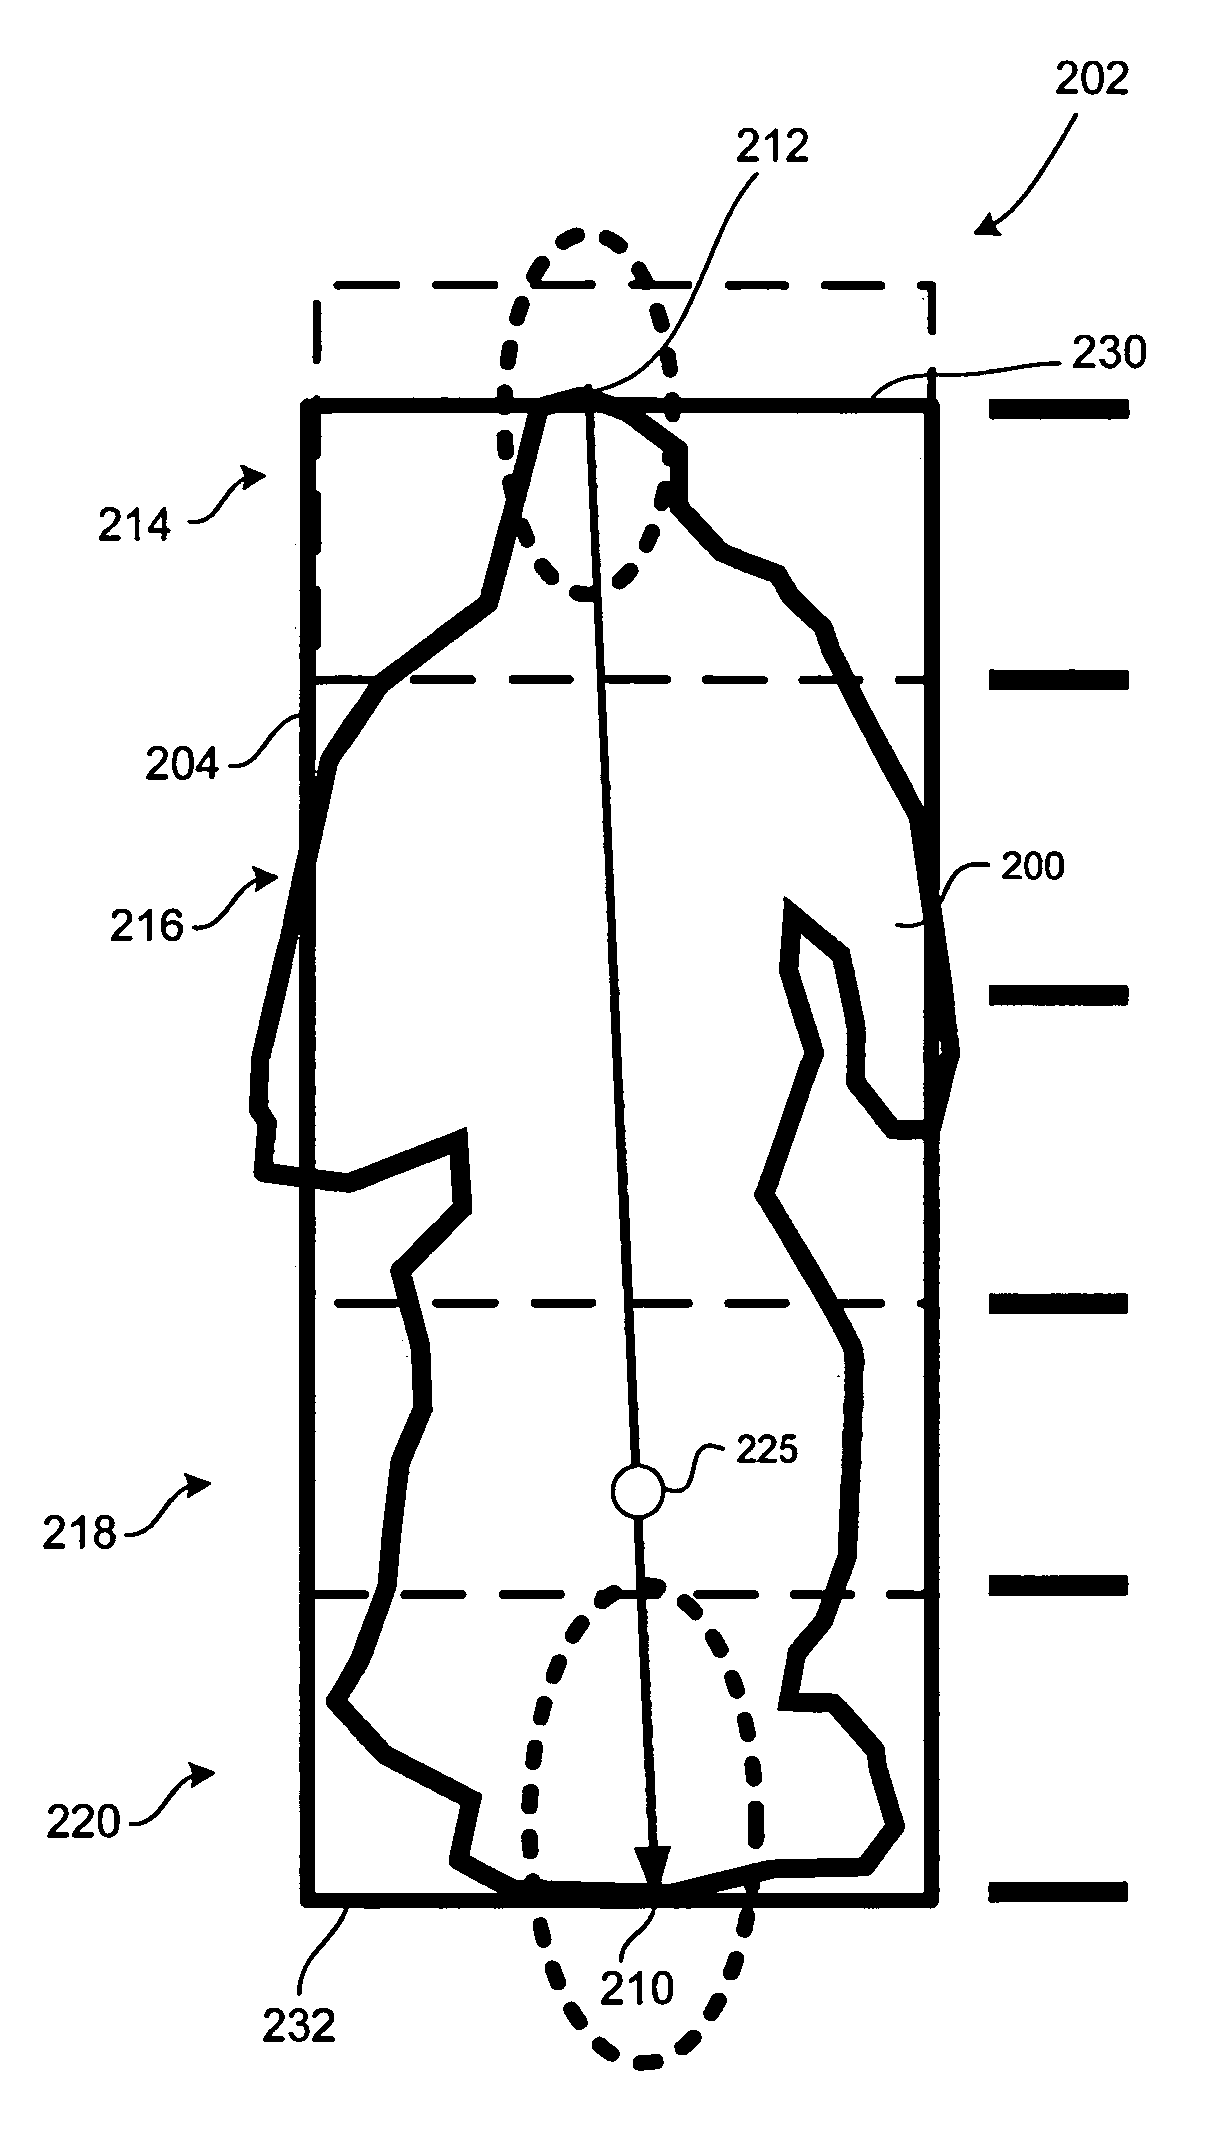 Method and system for camera autocalibration